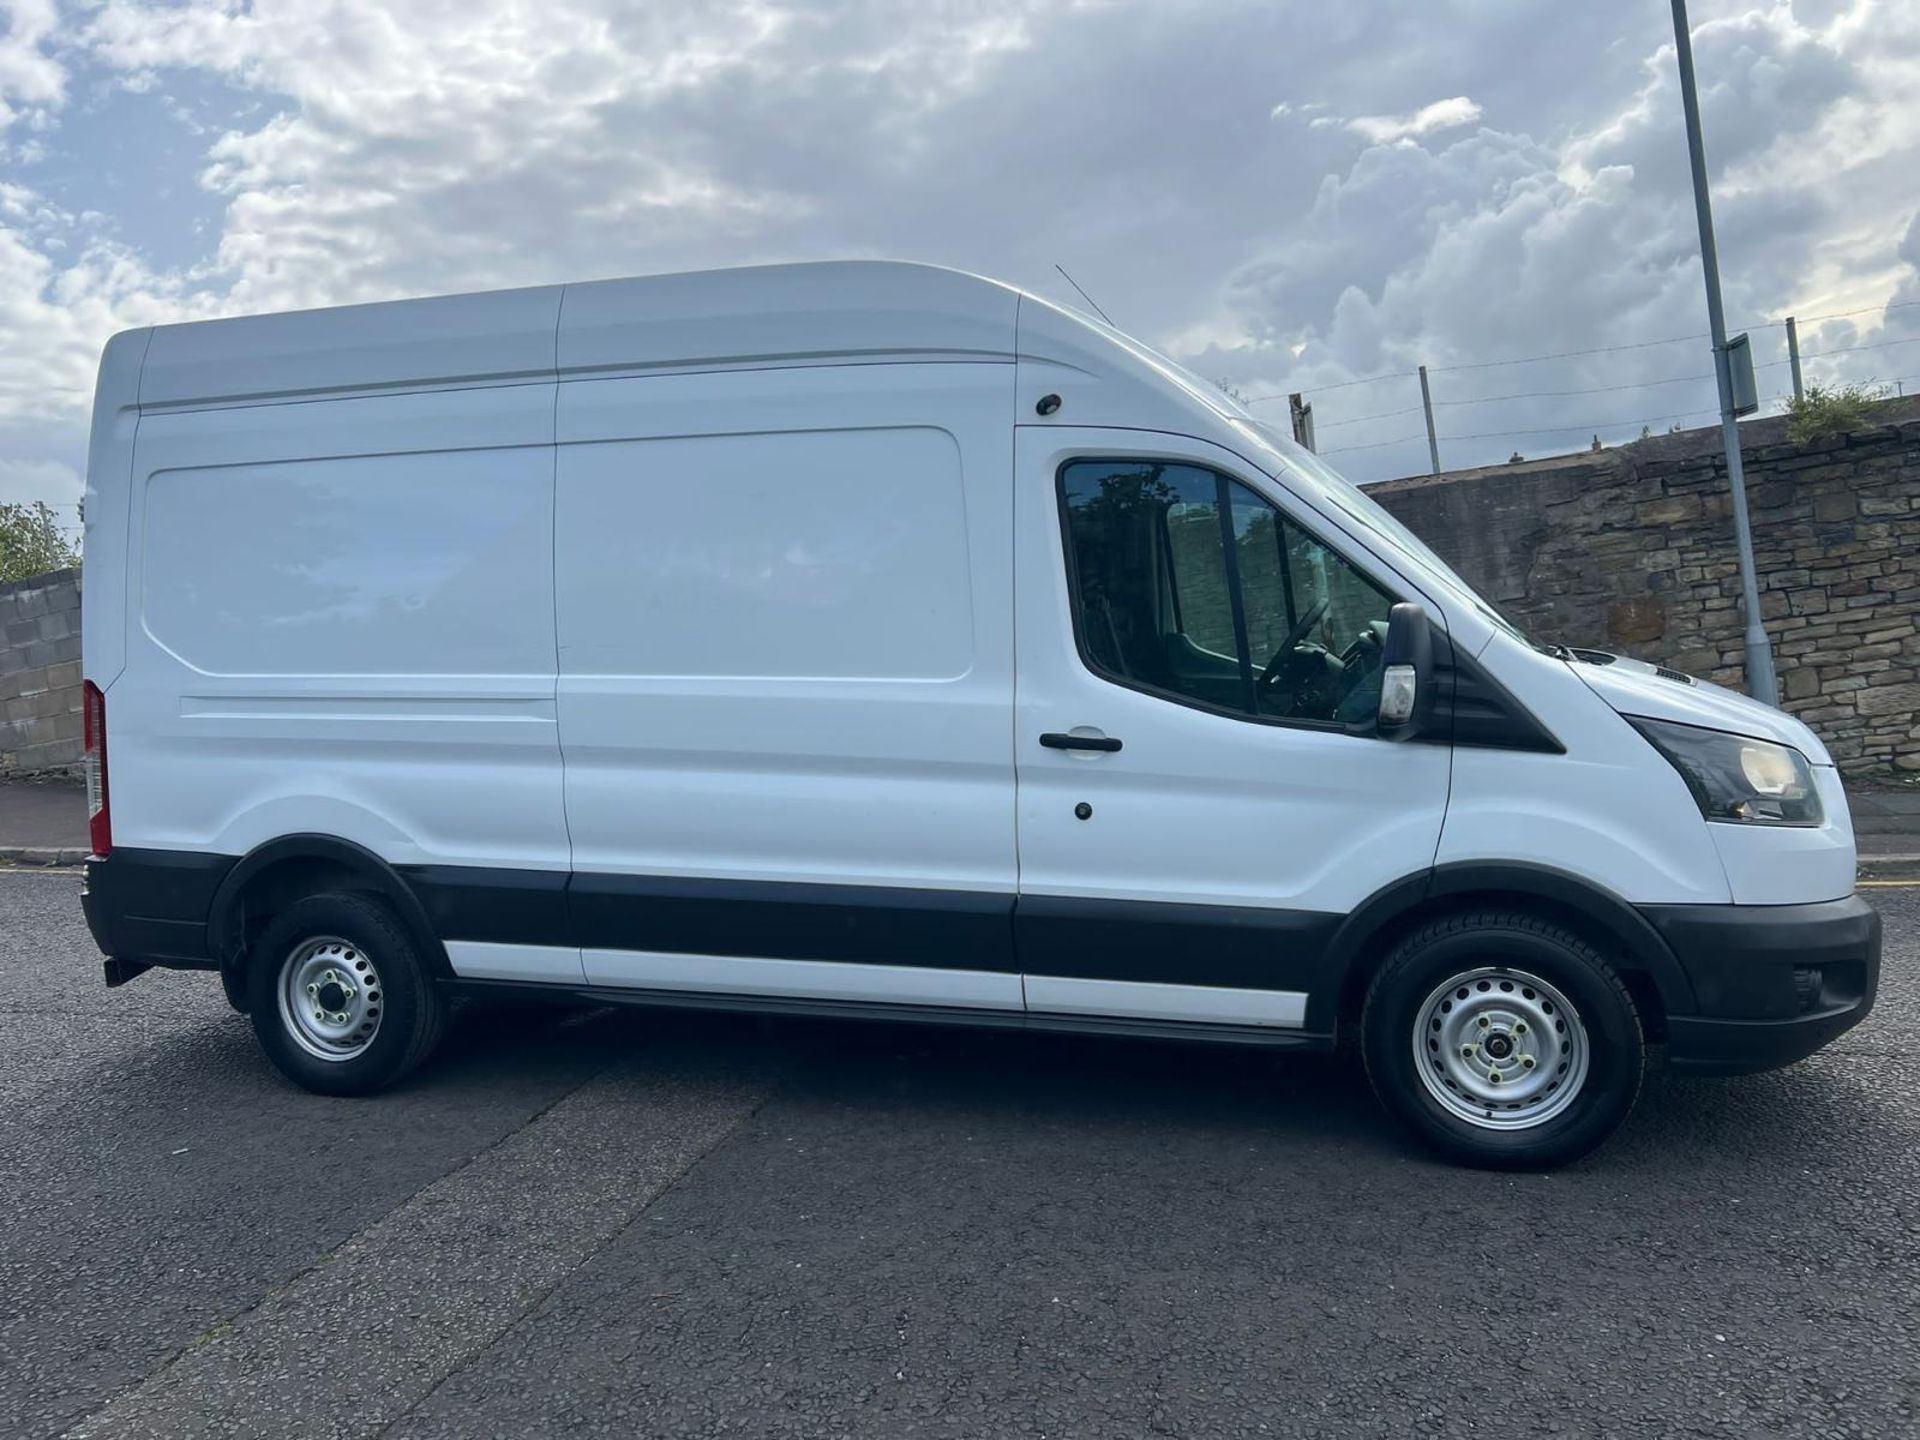 17 PLATE TRANSIT POWERFUL AND EFFICIENT: 360 CAMERAS - EURO 6 - 2 X KEYS - Image 3 of 12